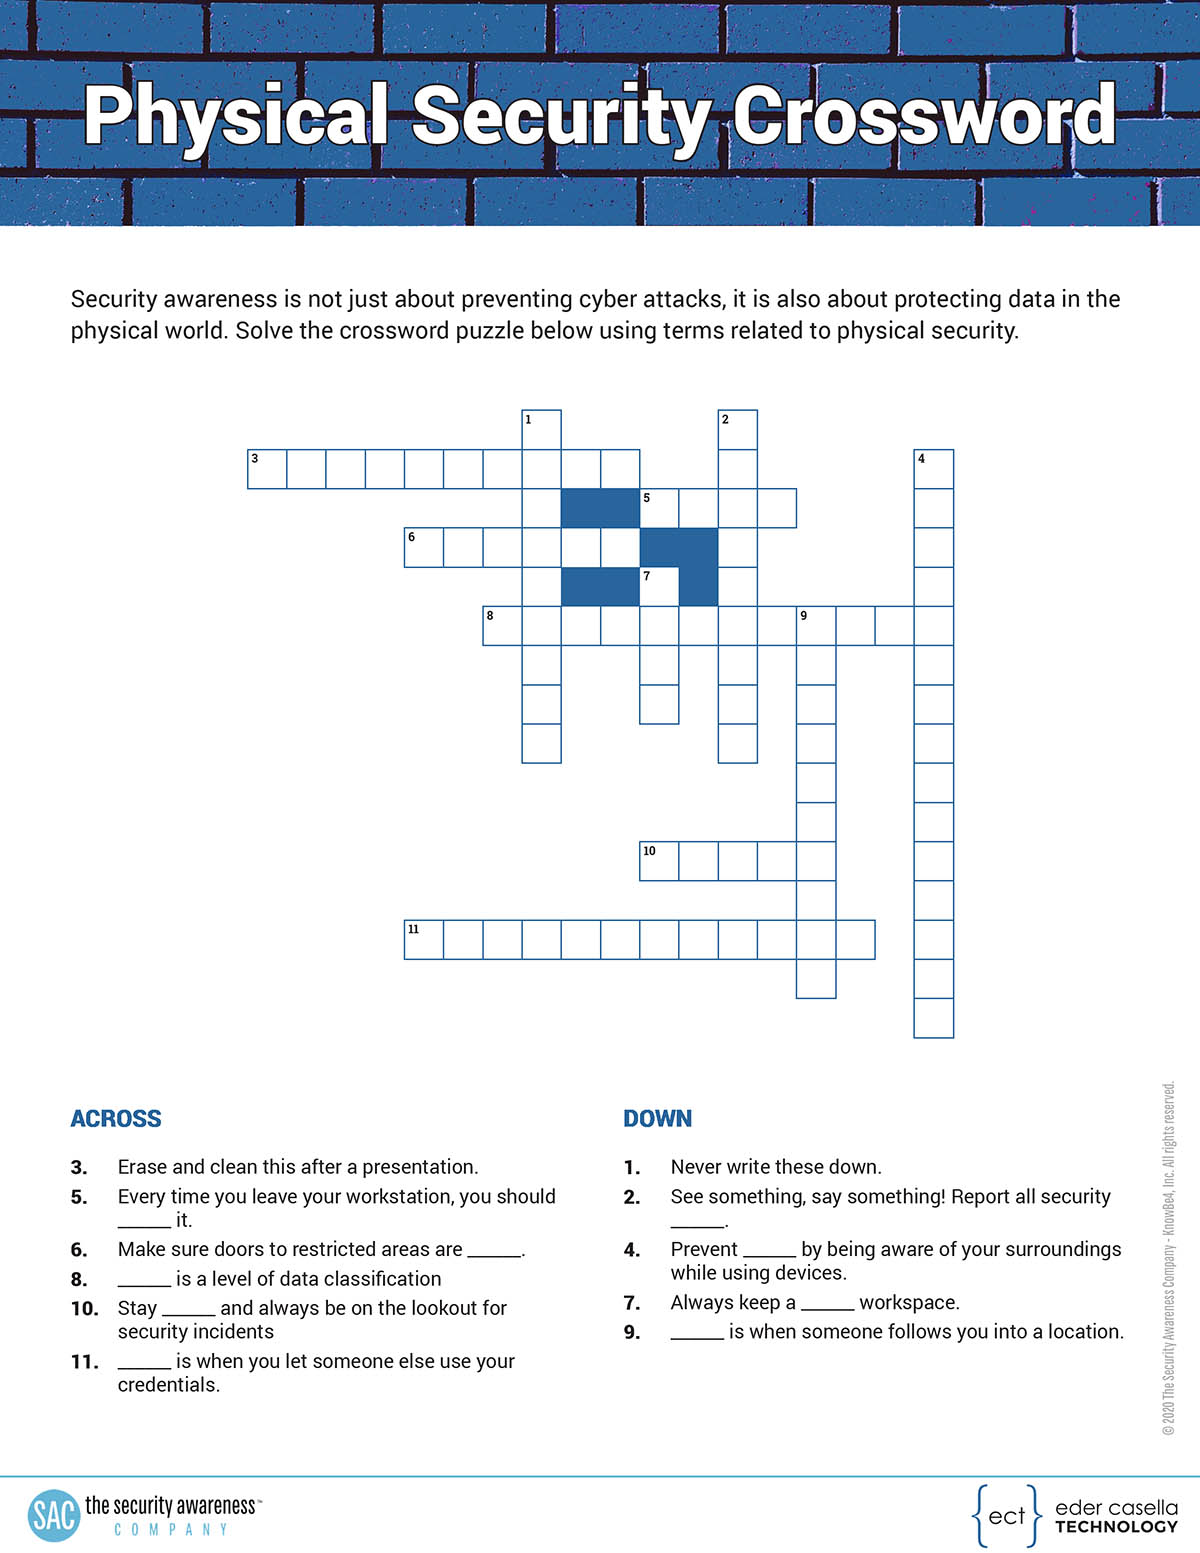 Physical security crossword puzzle.